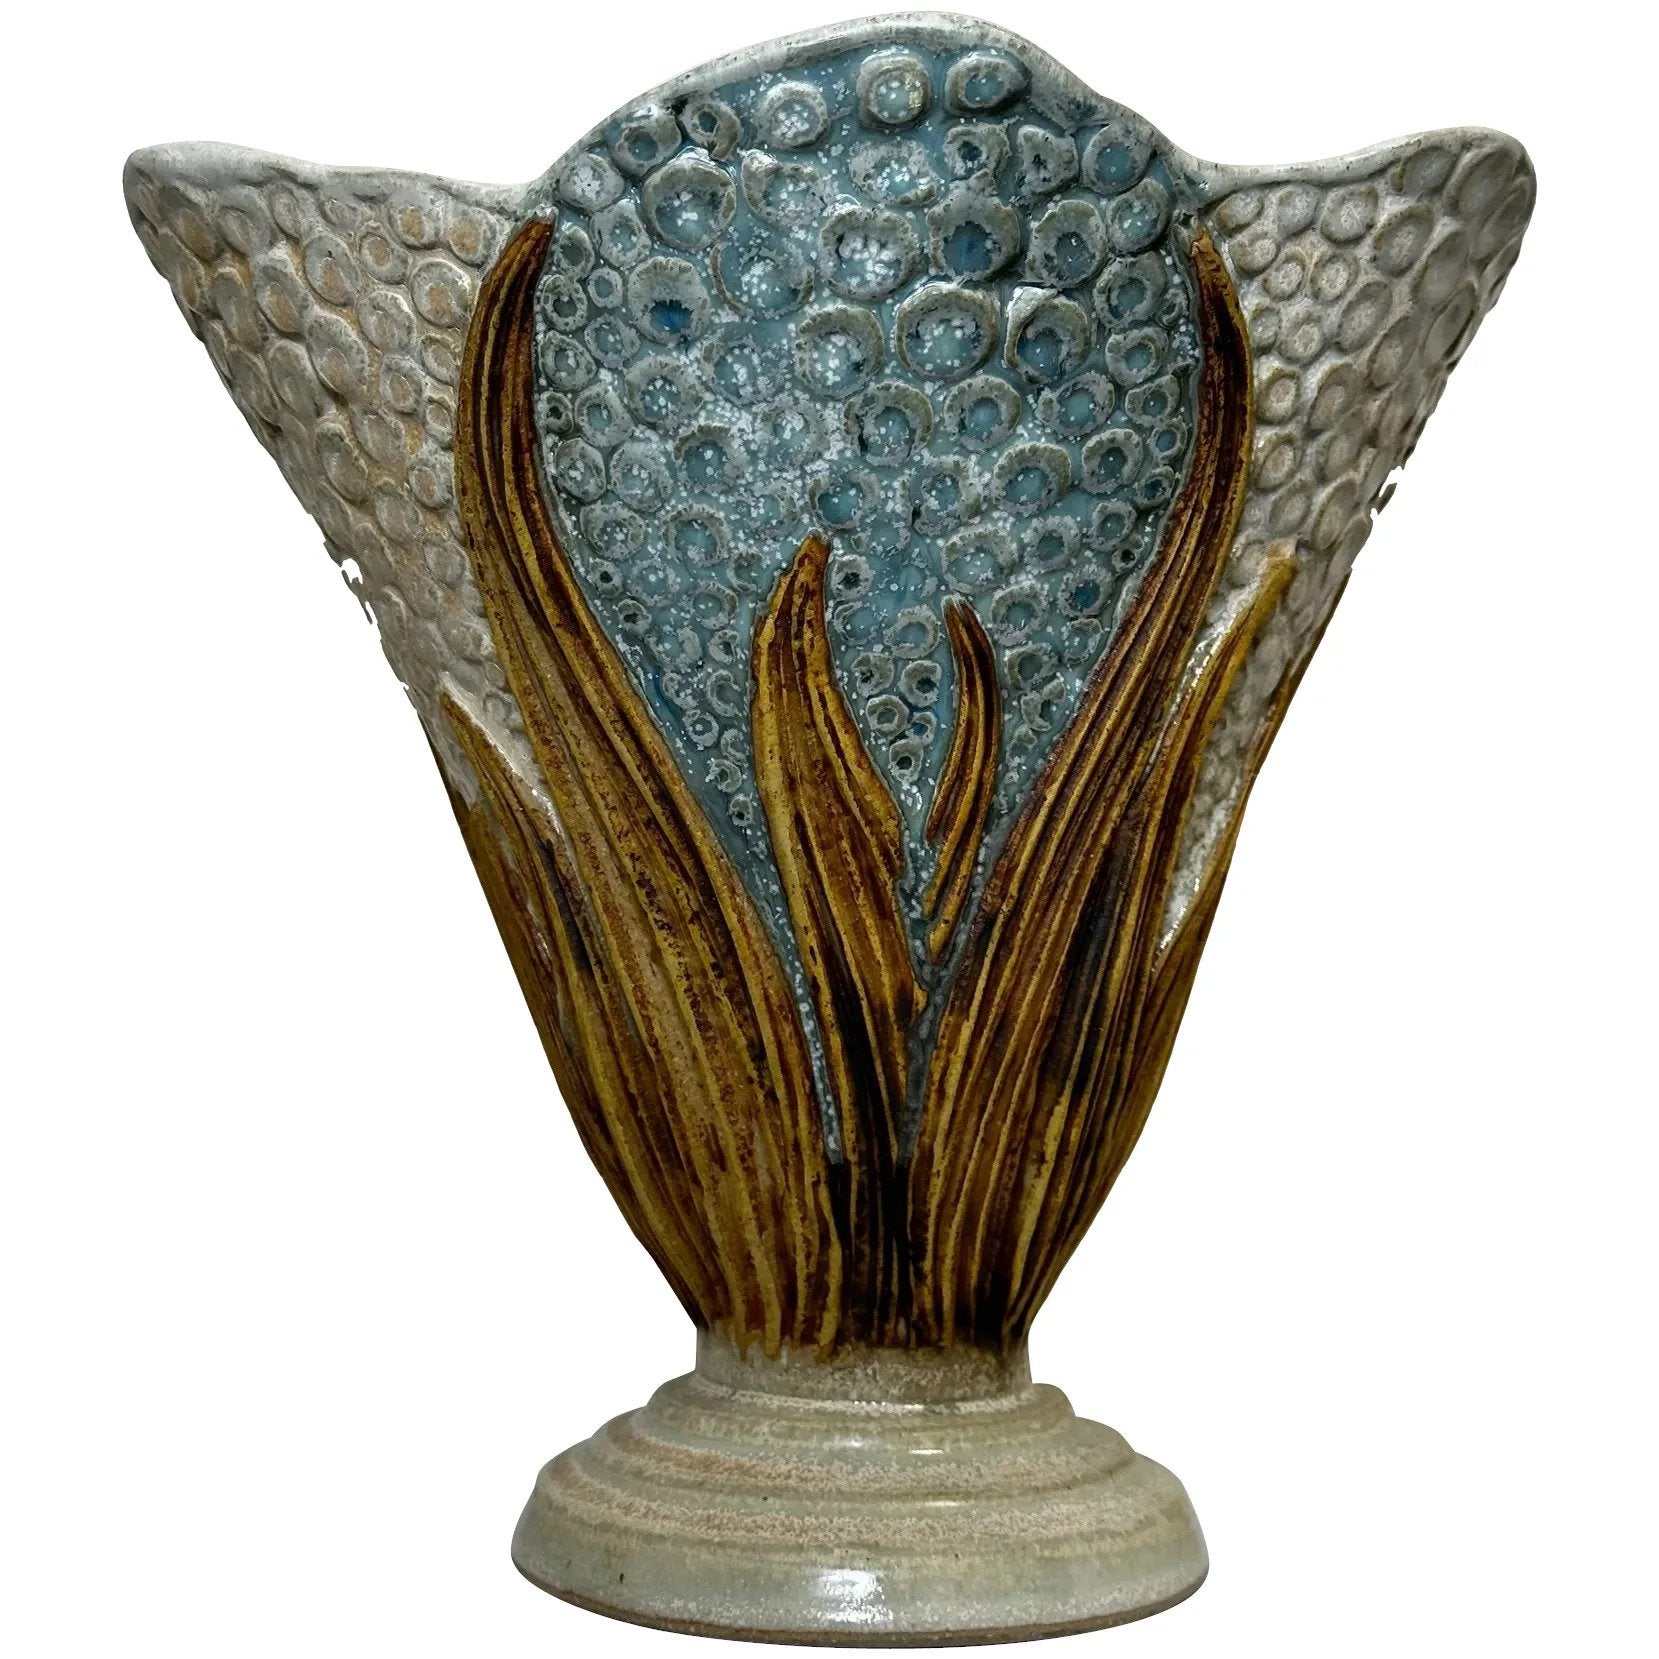 Large Studio Pottery Flowerhead Conical Shape Vase By Bernard Rooke Ceramicist - Cheshire Antiques Consultant